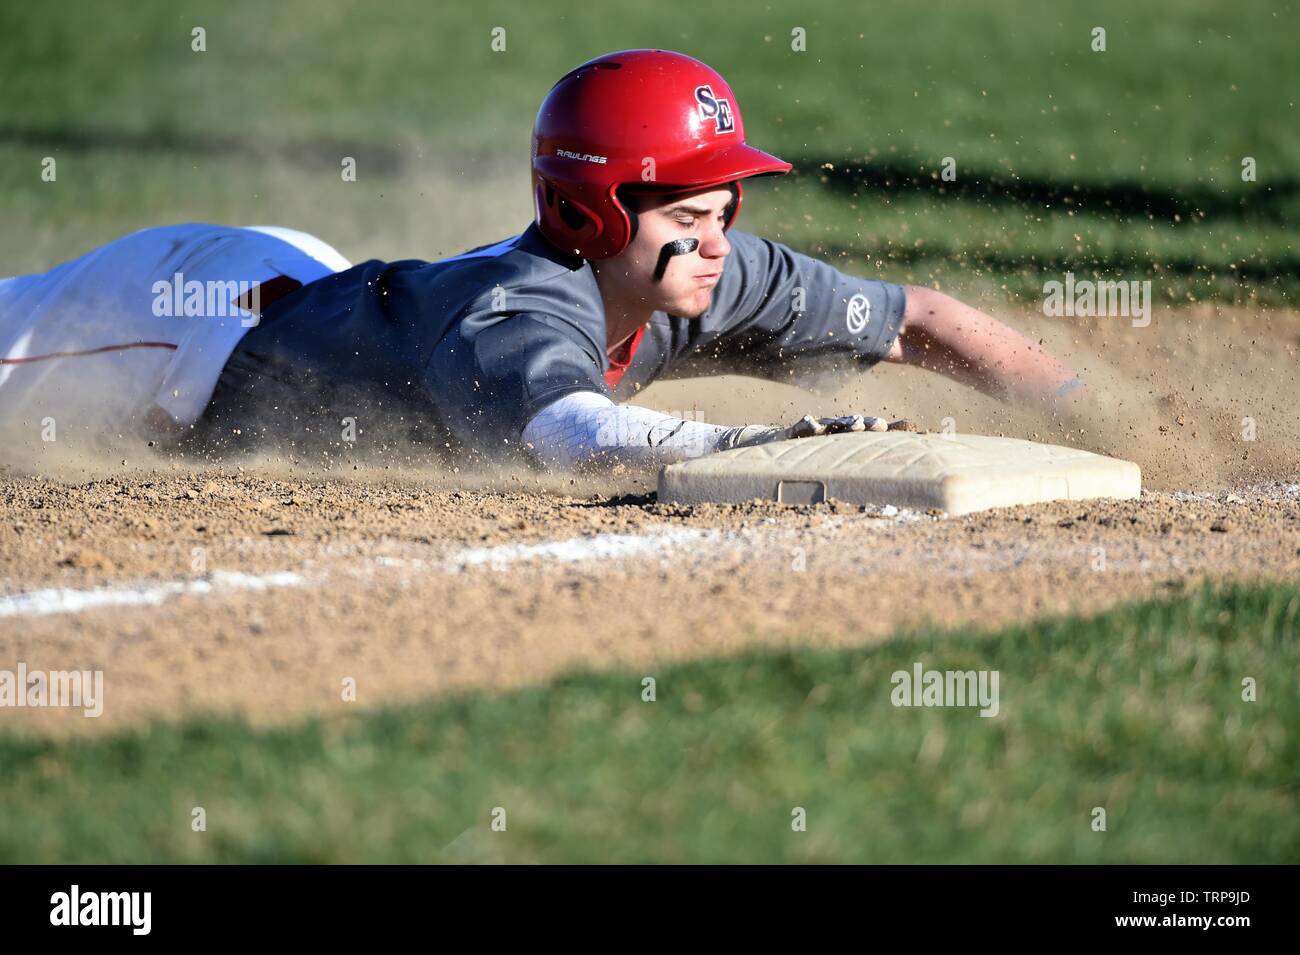 Base runner sliding head first safely into third base with a triple. USA. Stock Photo